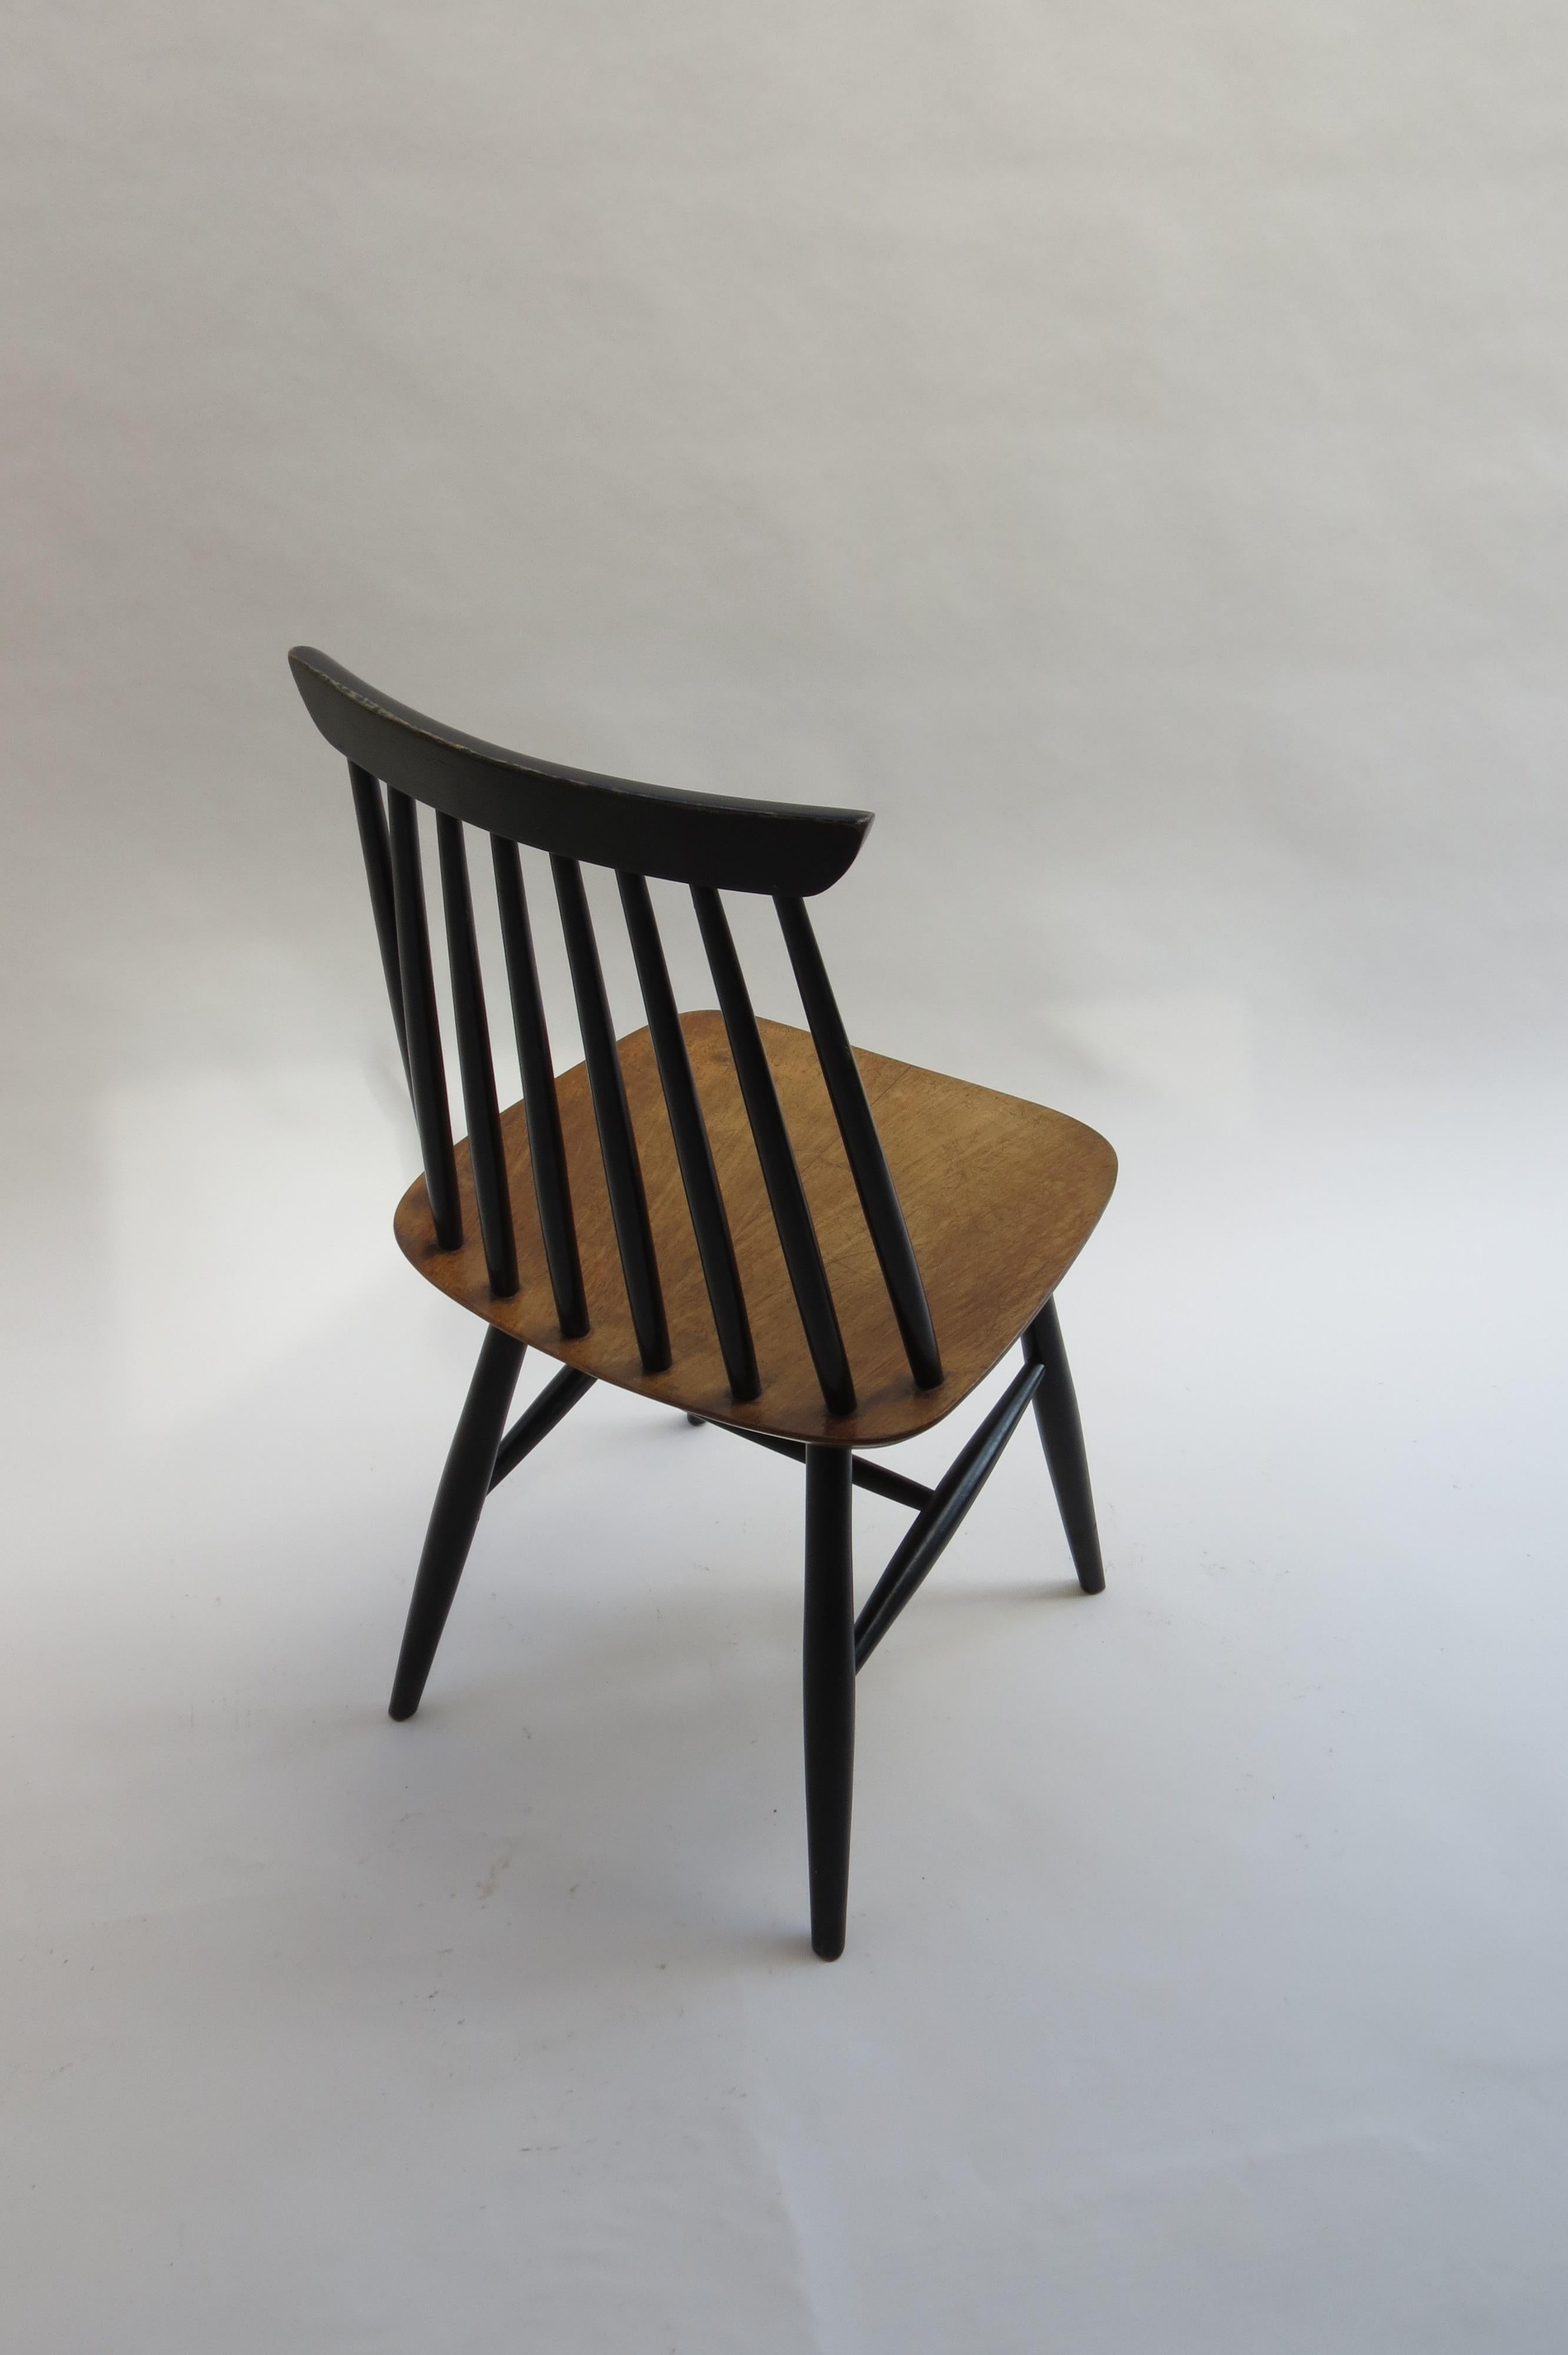 The 1950s Black and Walnut Dining Chair in the Style of Imari Tapiovaara (Englisch)